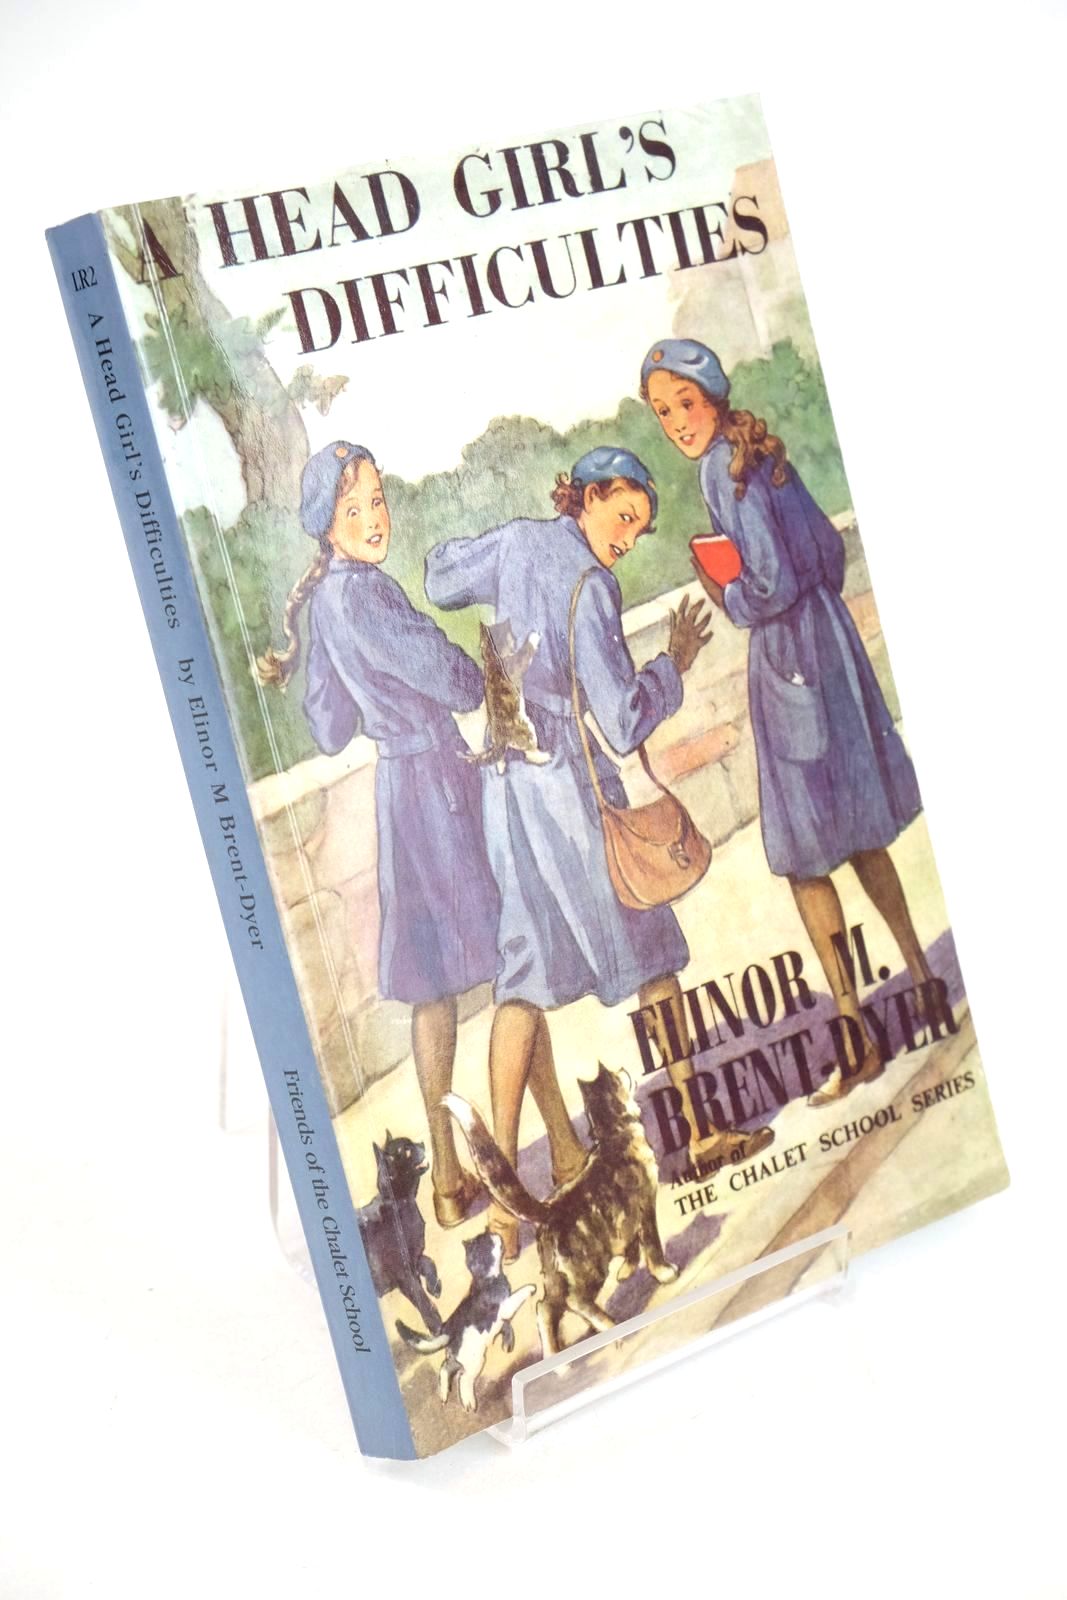 Photo of A HEAD GIRL'S DIFFICULTIES written by Brent-Dyer, Elinor M. published by Friends Of The Chalet School (STOCK CODE: 1327616)  for sale by Stella & Rose's Books